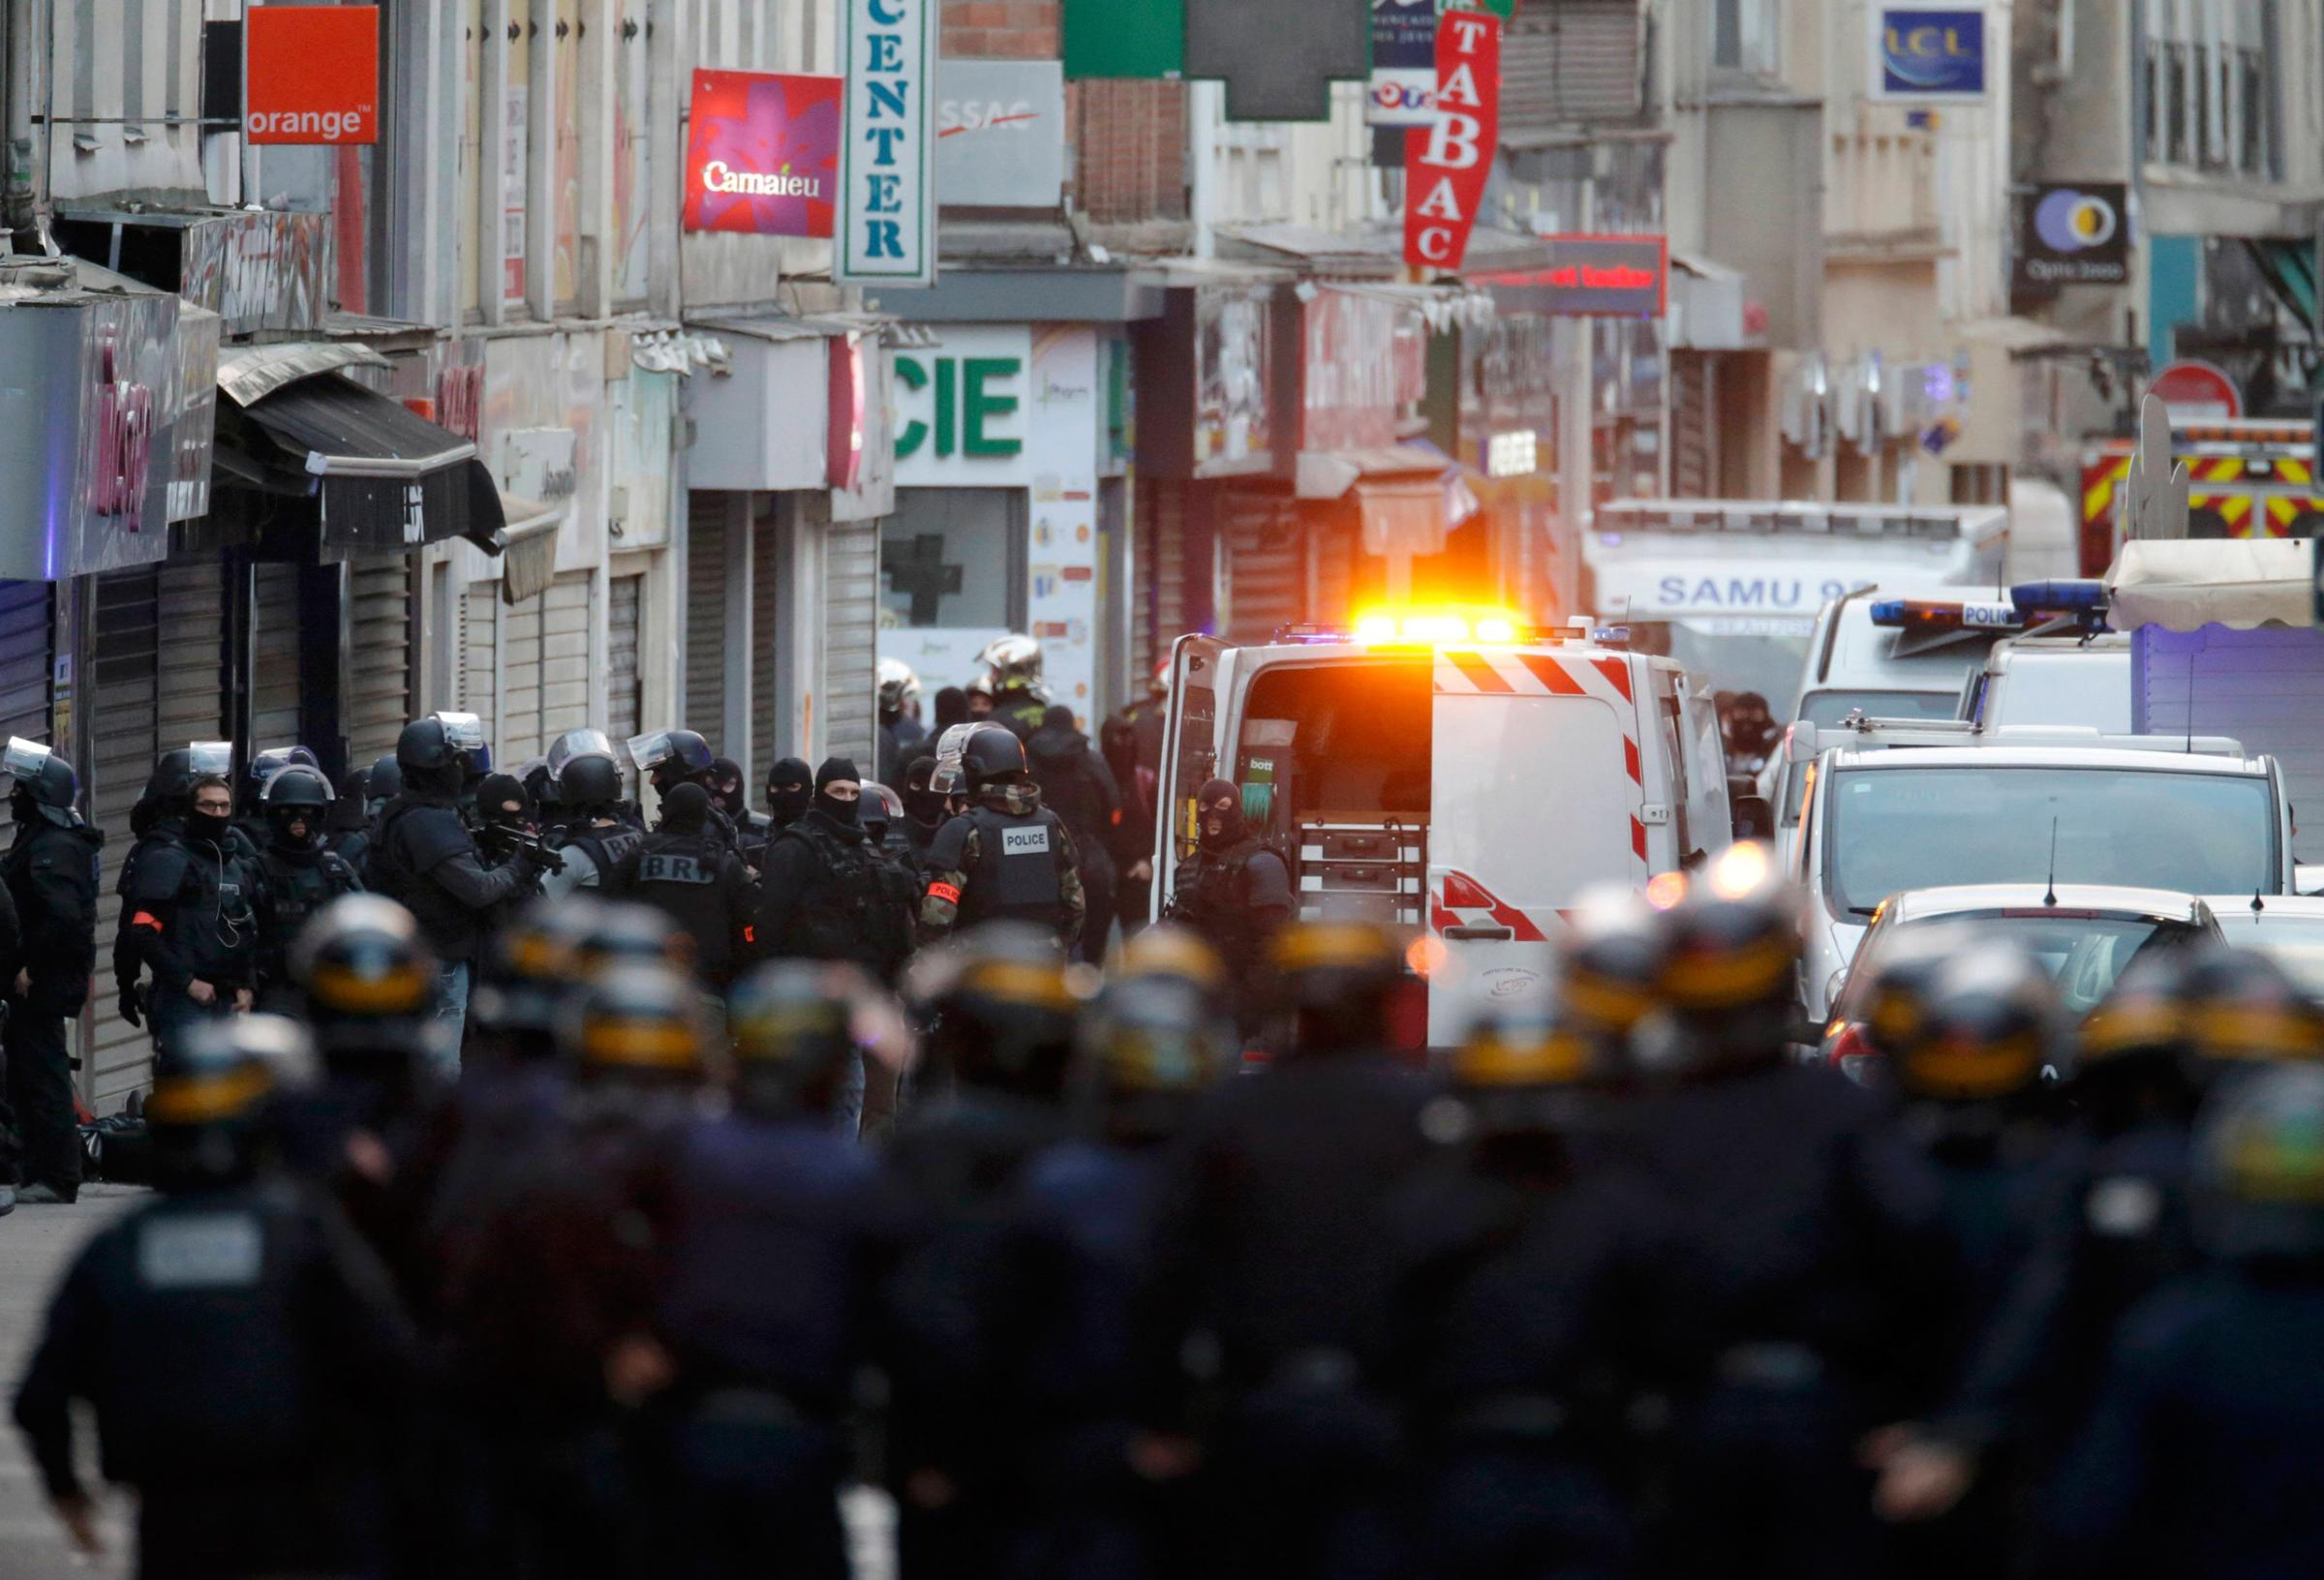 French special police forces secure the area as shots are exchanged in Saint-Denis, France, near Paris